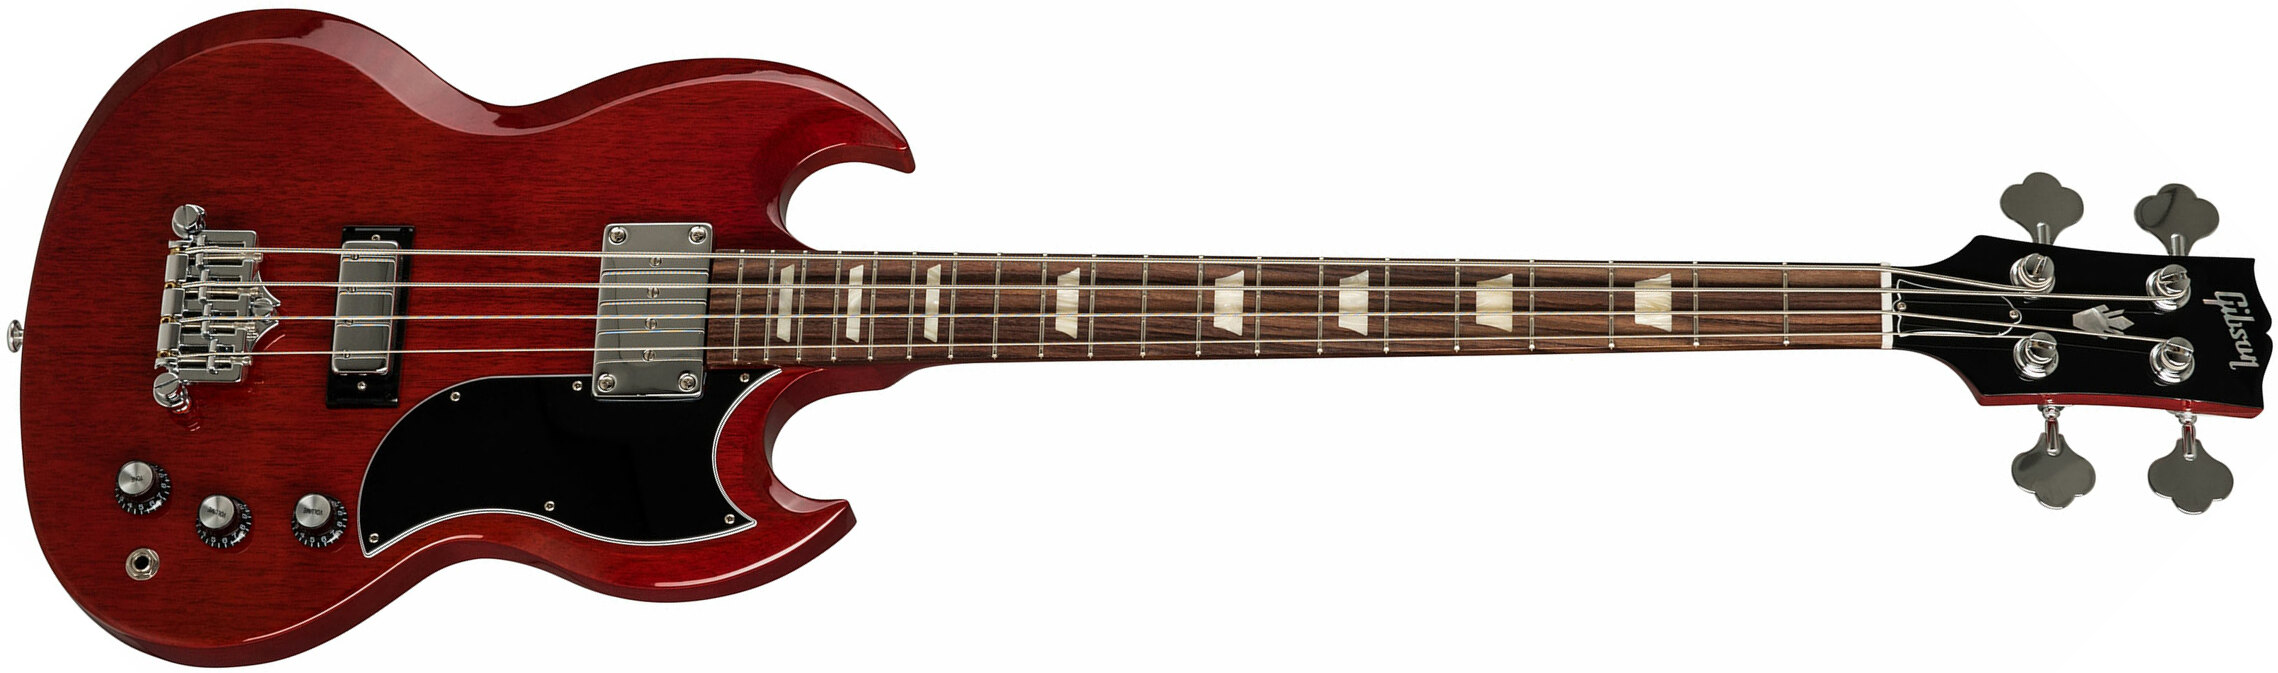 Gibson Sg Standard Bass - Heritage Cherry - Solidbody E-bass - Main picture